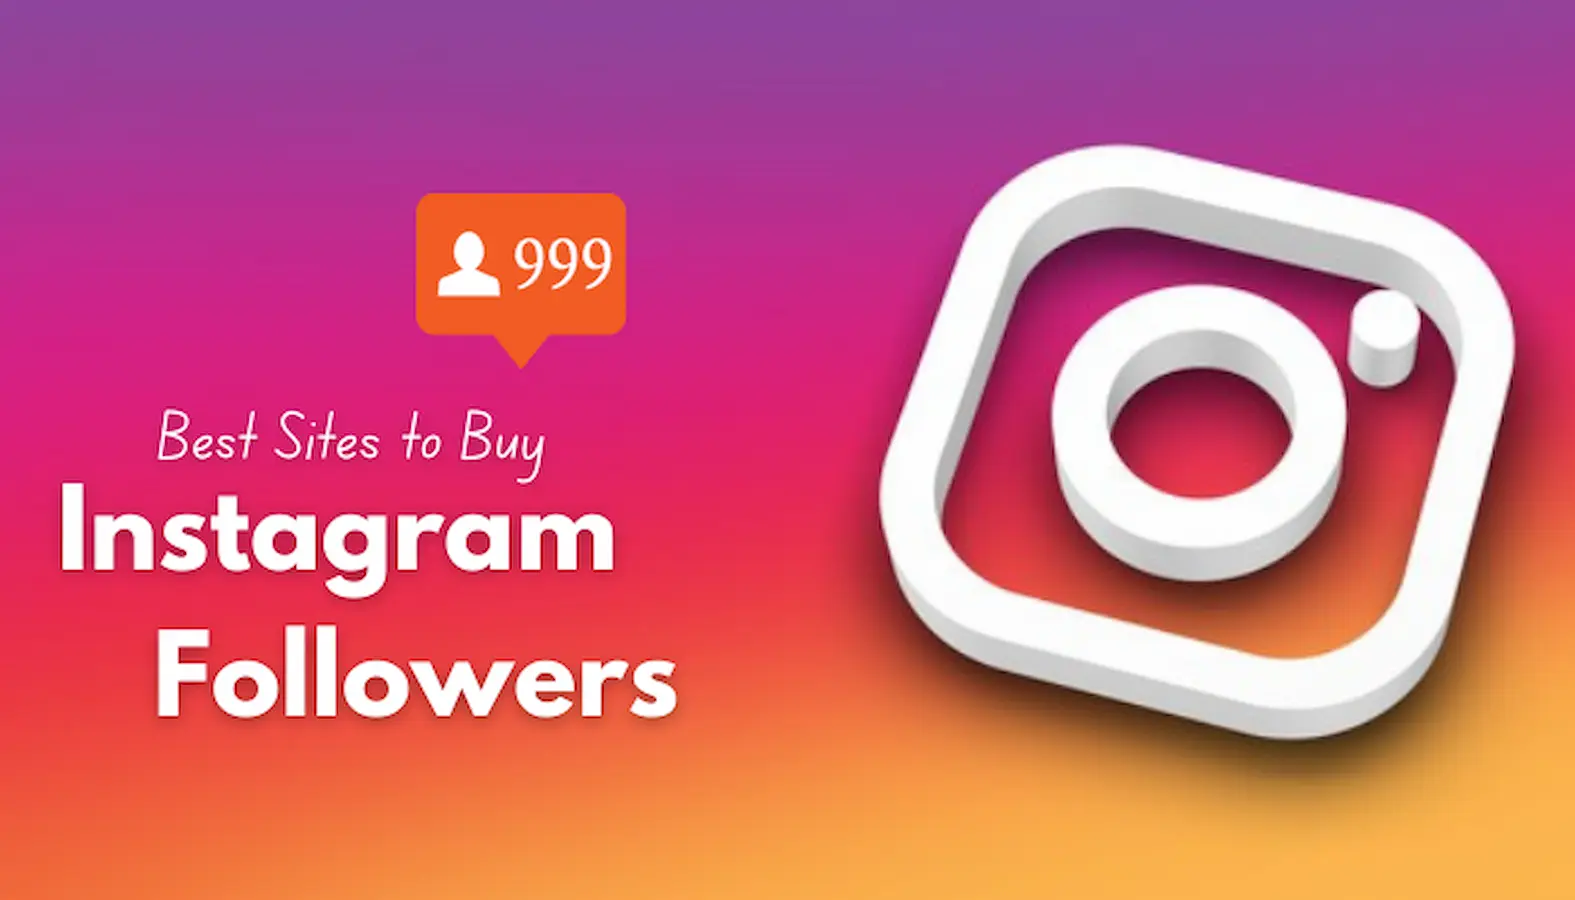 How to Use Instagram With Your Direct Sales Business